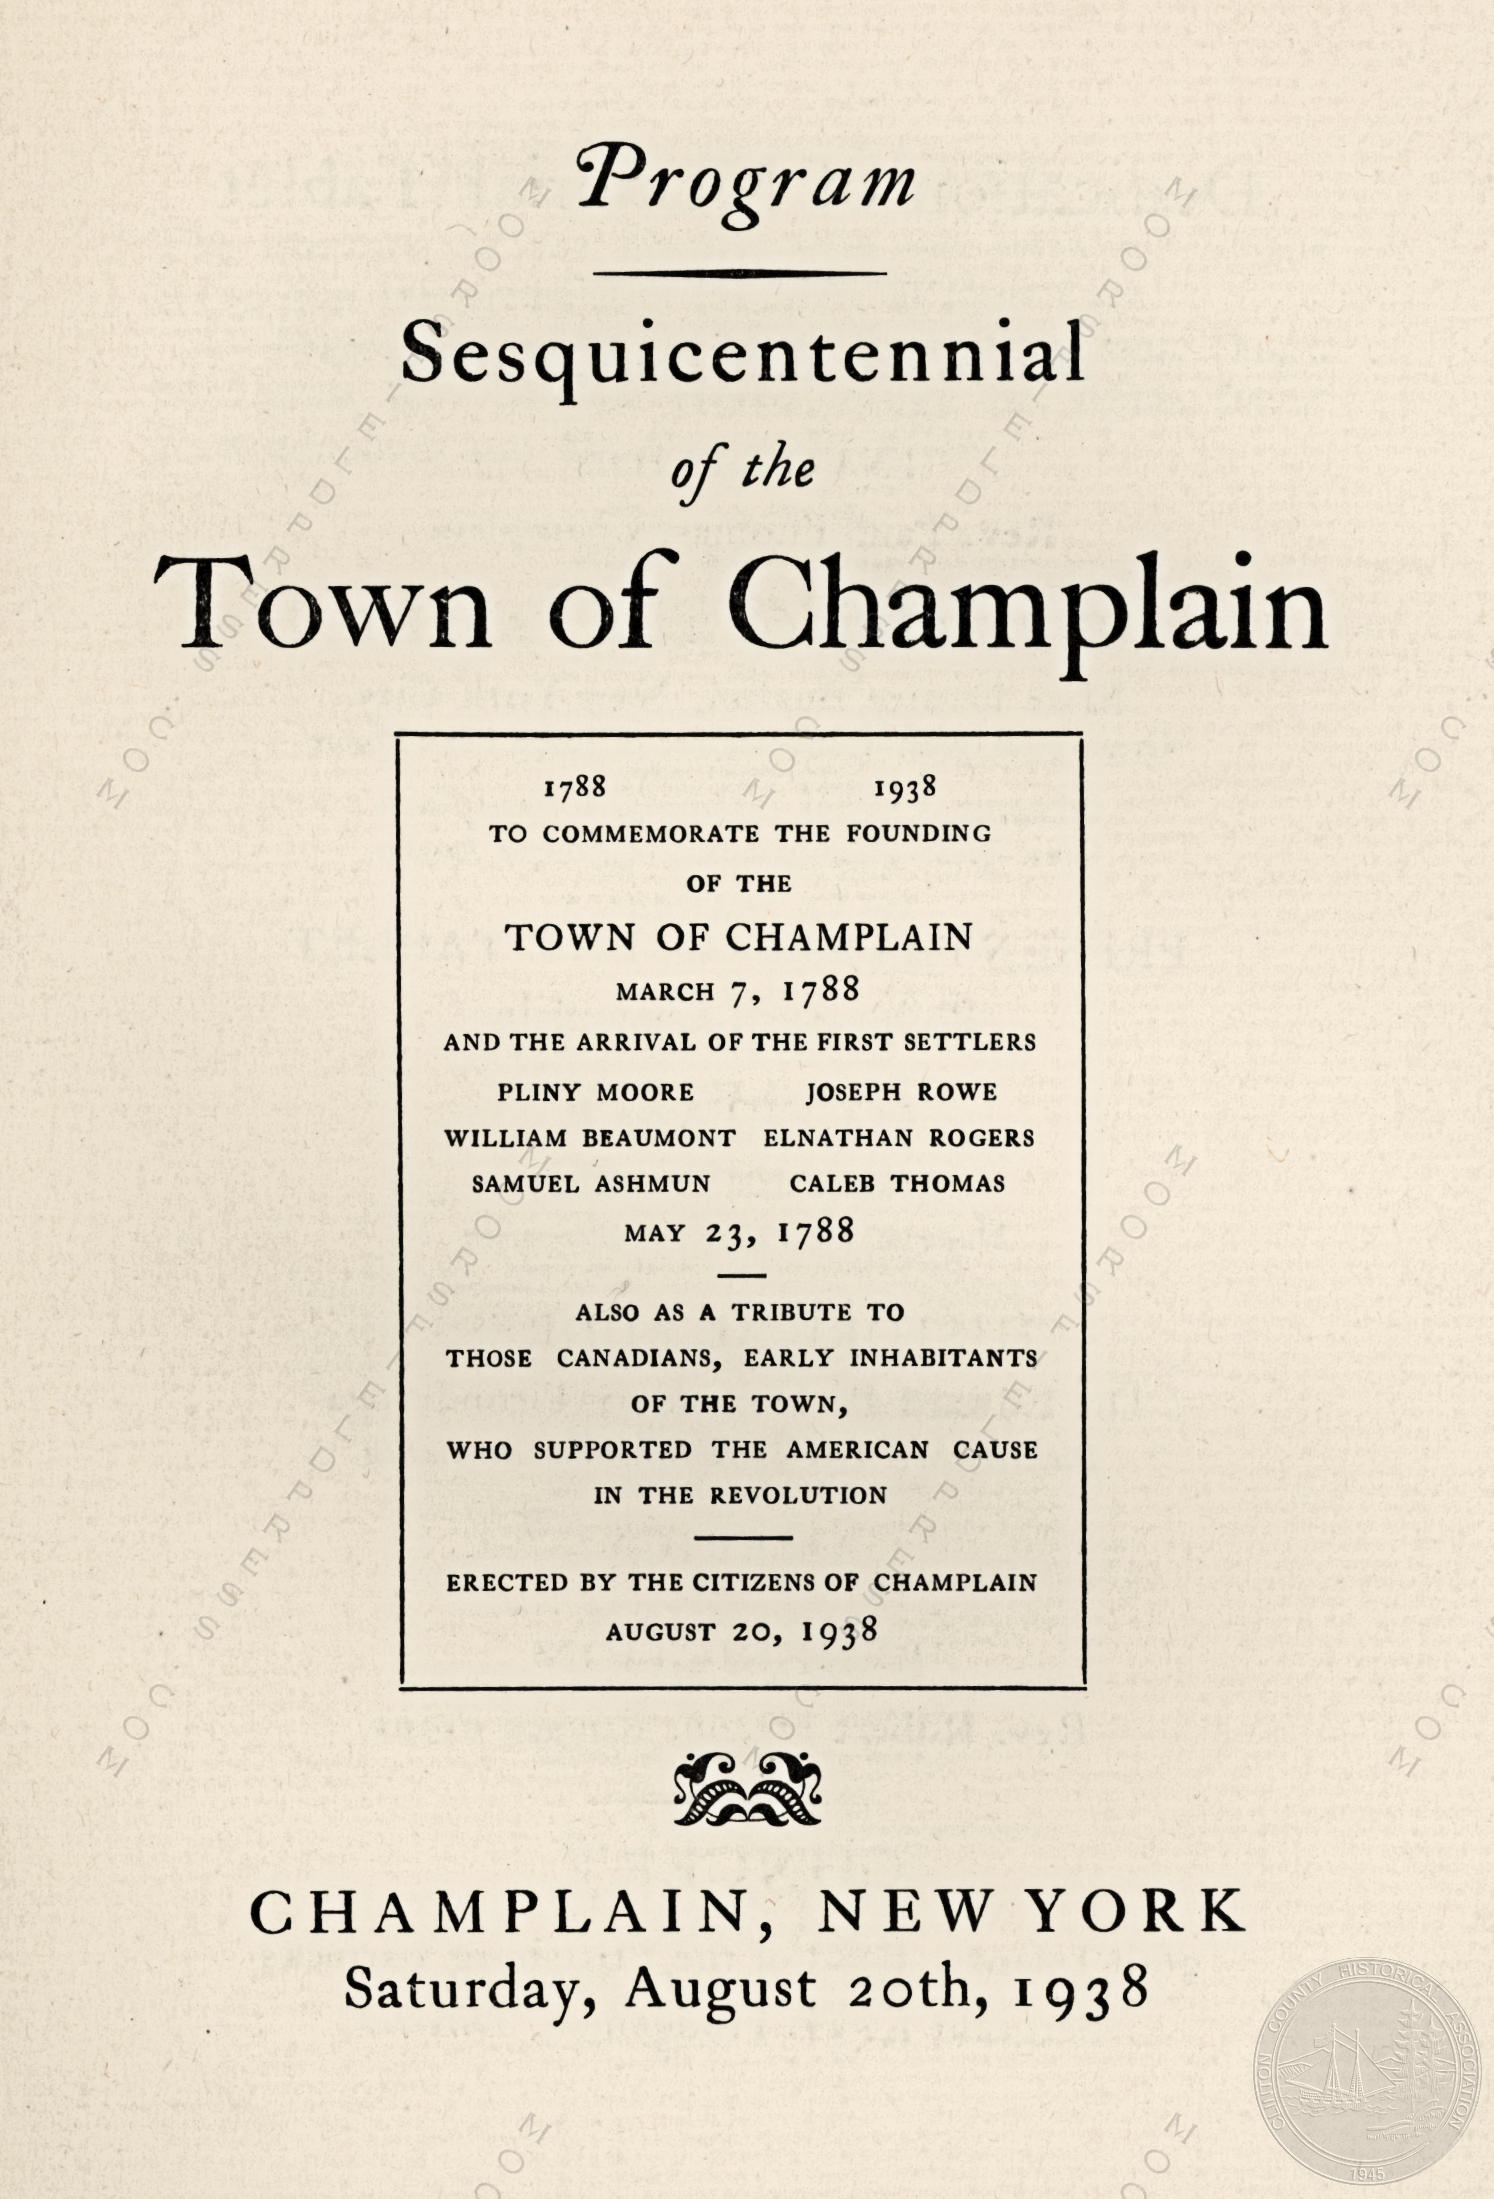 Moorsfield Press Printings - Sesquicentennial
                      of the Town of Champlain Program-1938 (1788-1938)